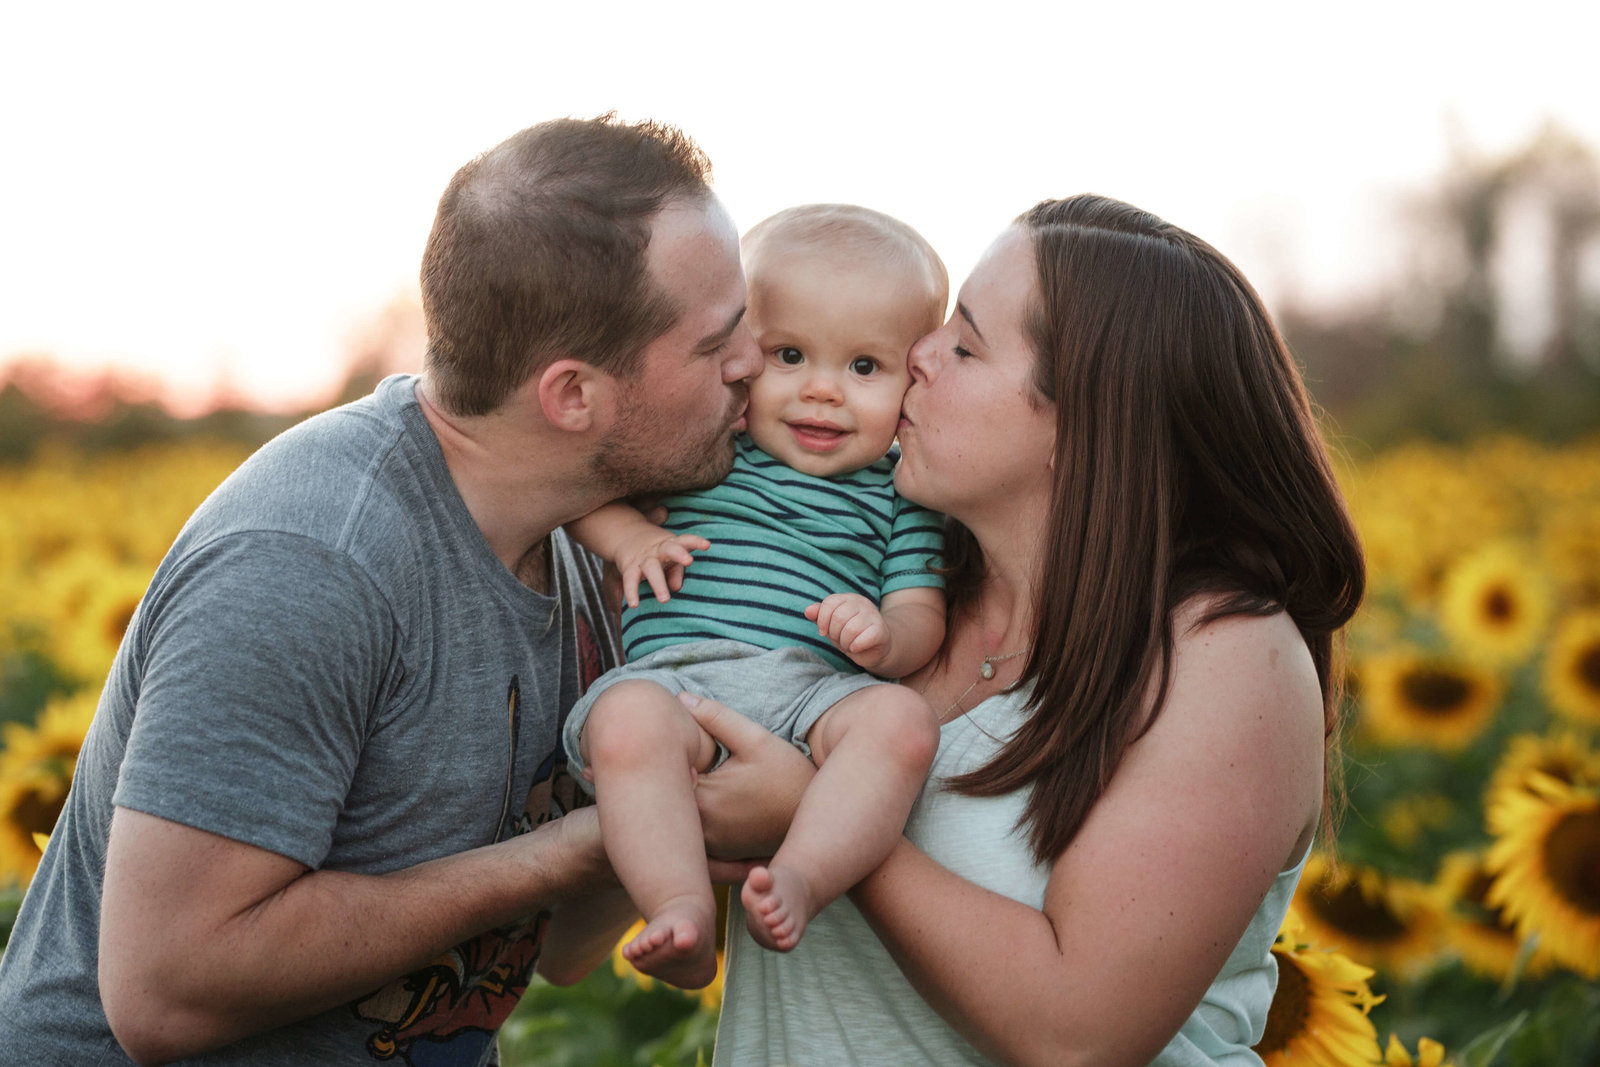 Cleveland family photography session in sunflowers